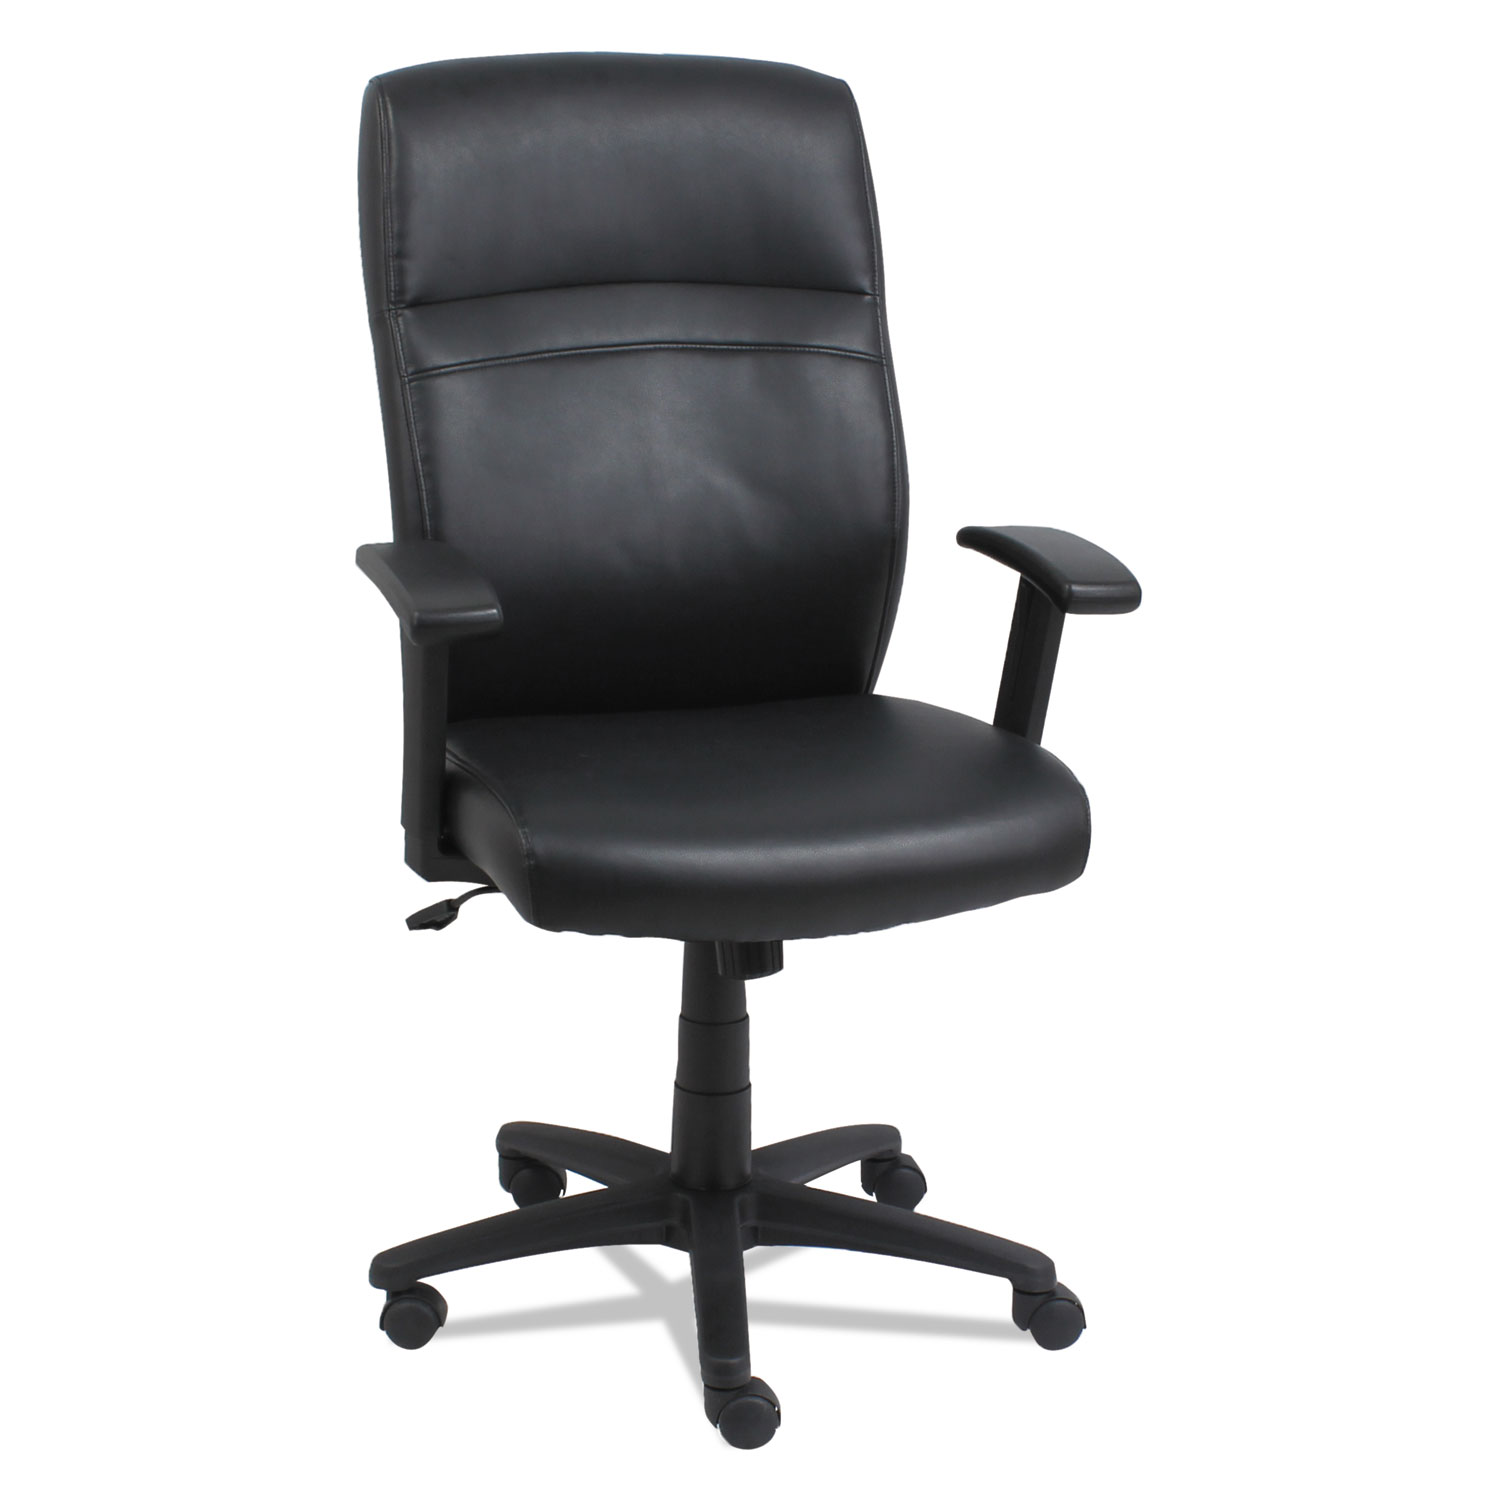 High-Back Swivel/Tilt Leather Chair, Supports up to 275 lbs., Black Seat/Black Back, Black Base